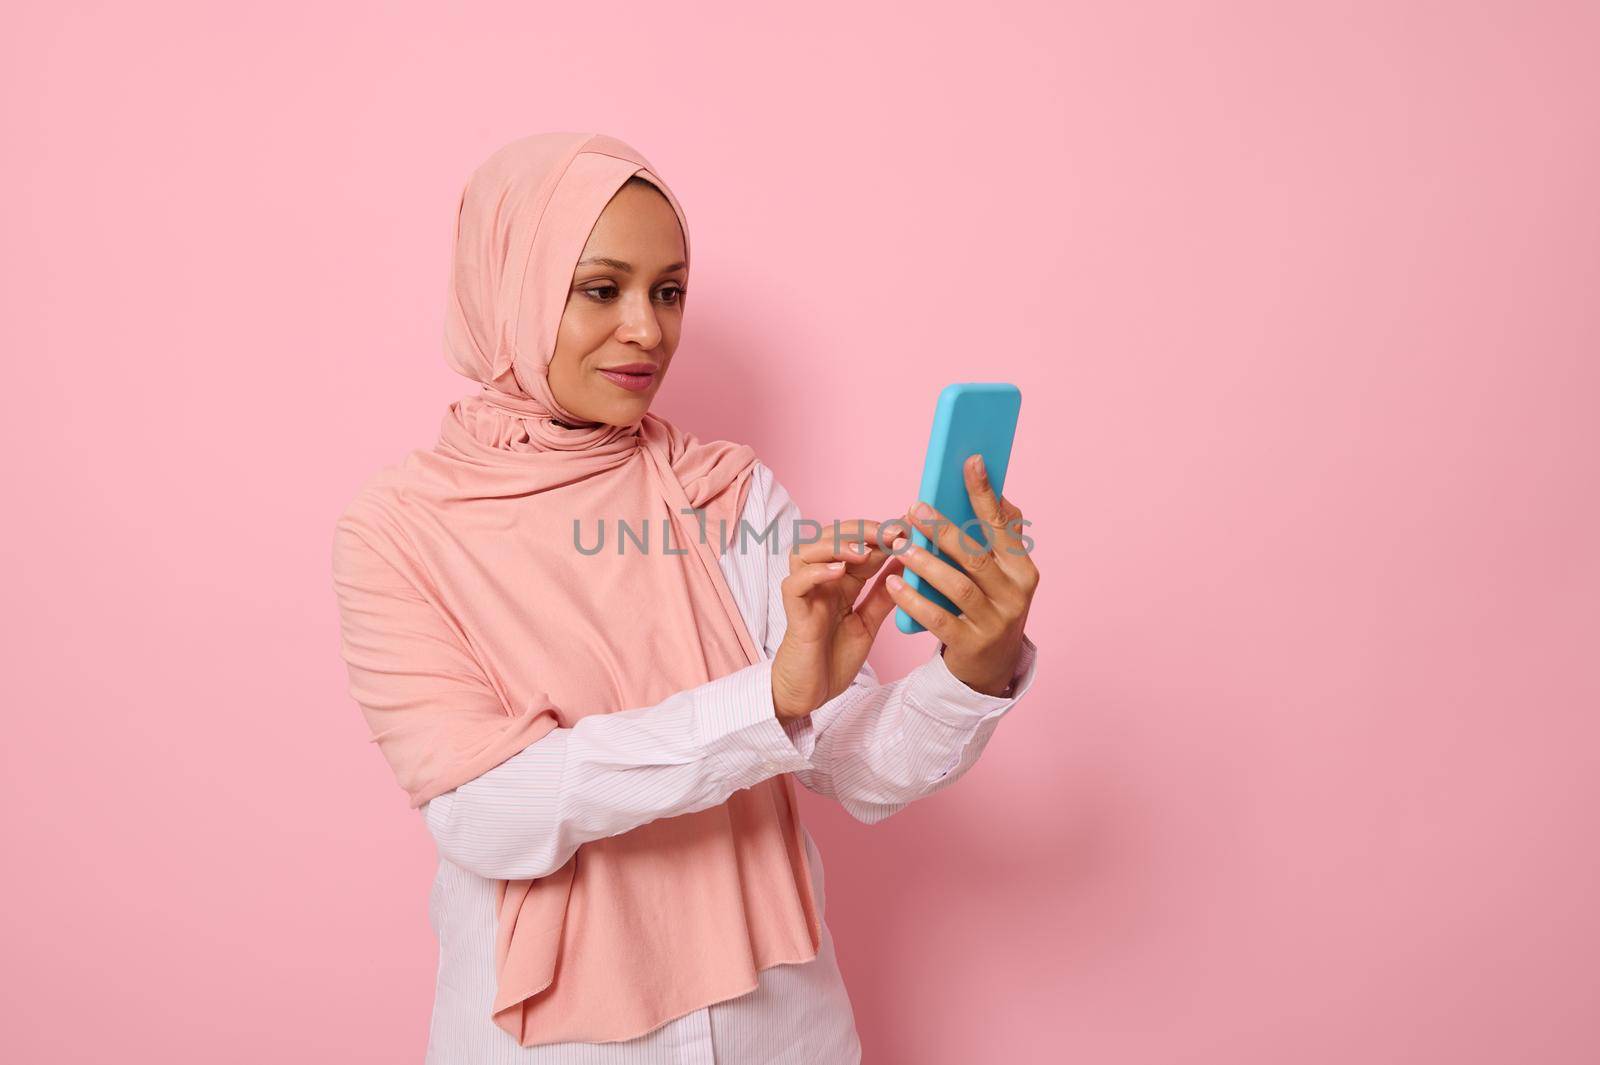 Isolated portrait of confident Arab Muslim middle aged woman in strict religious outfit and covered head in pink hijab texting a message on a mobile phone in her hands, colored background, copy space by artgf